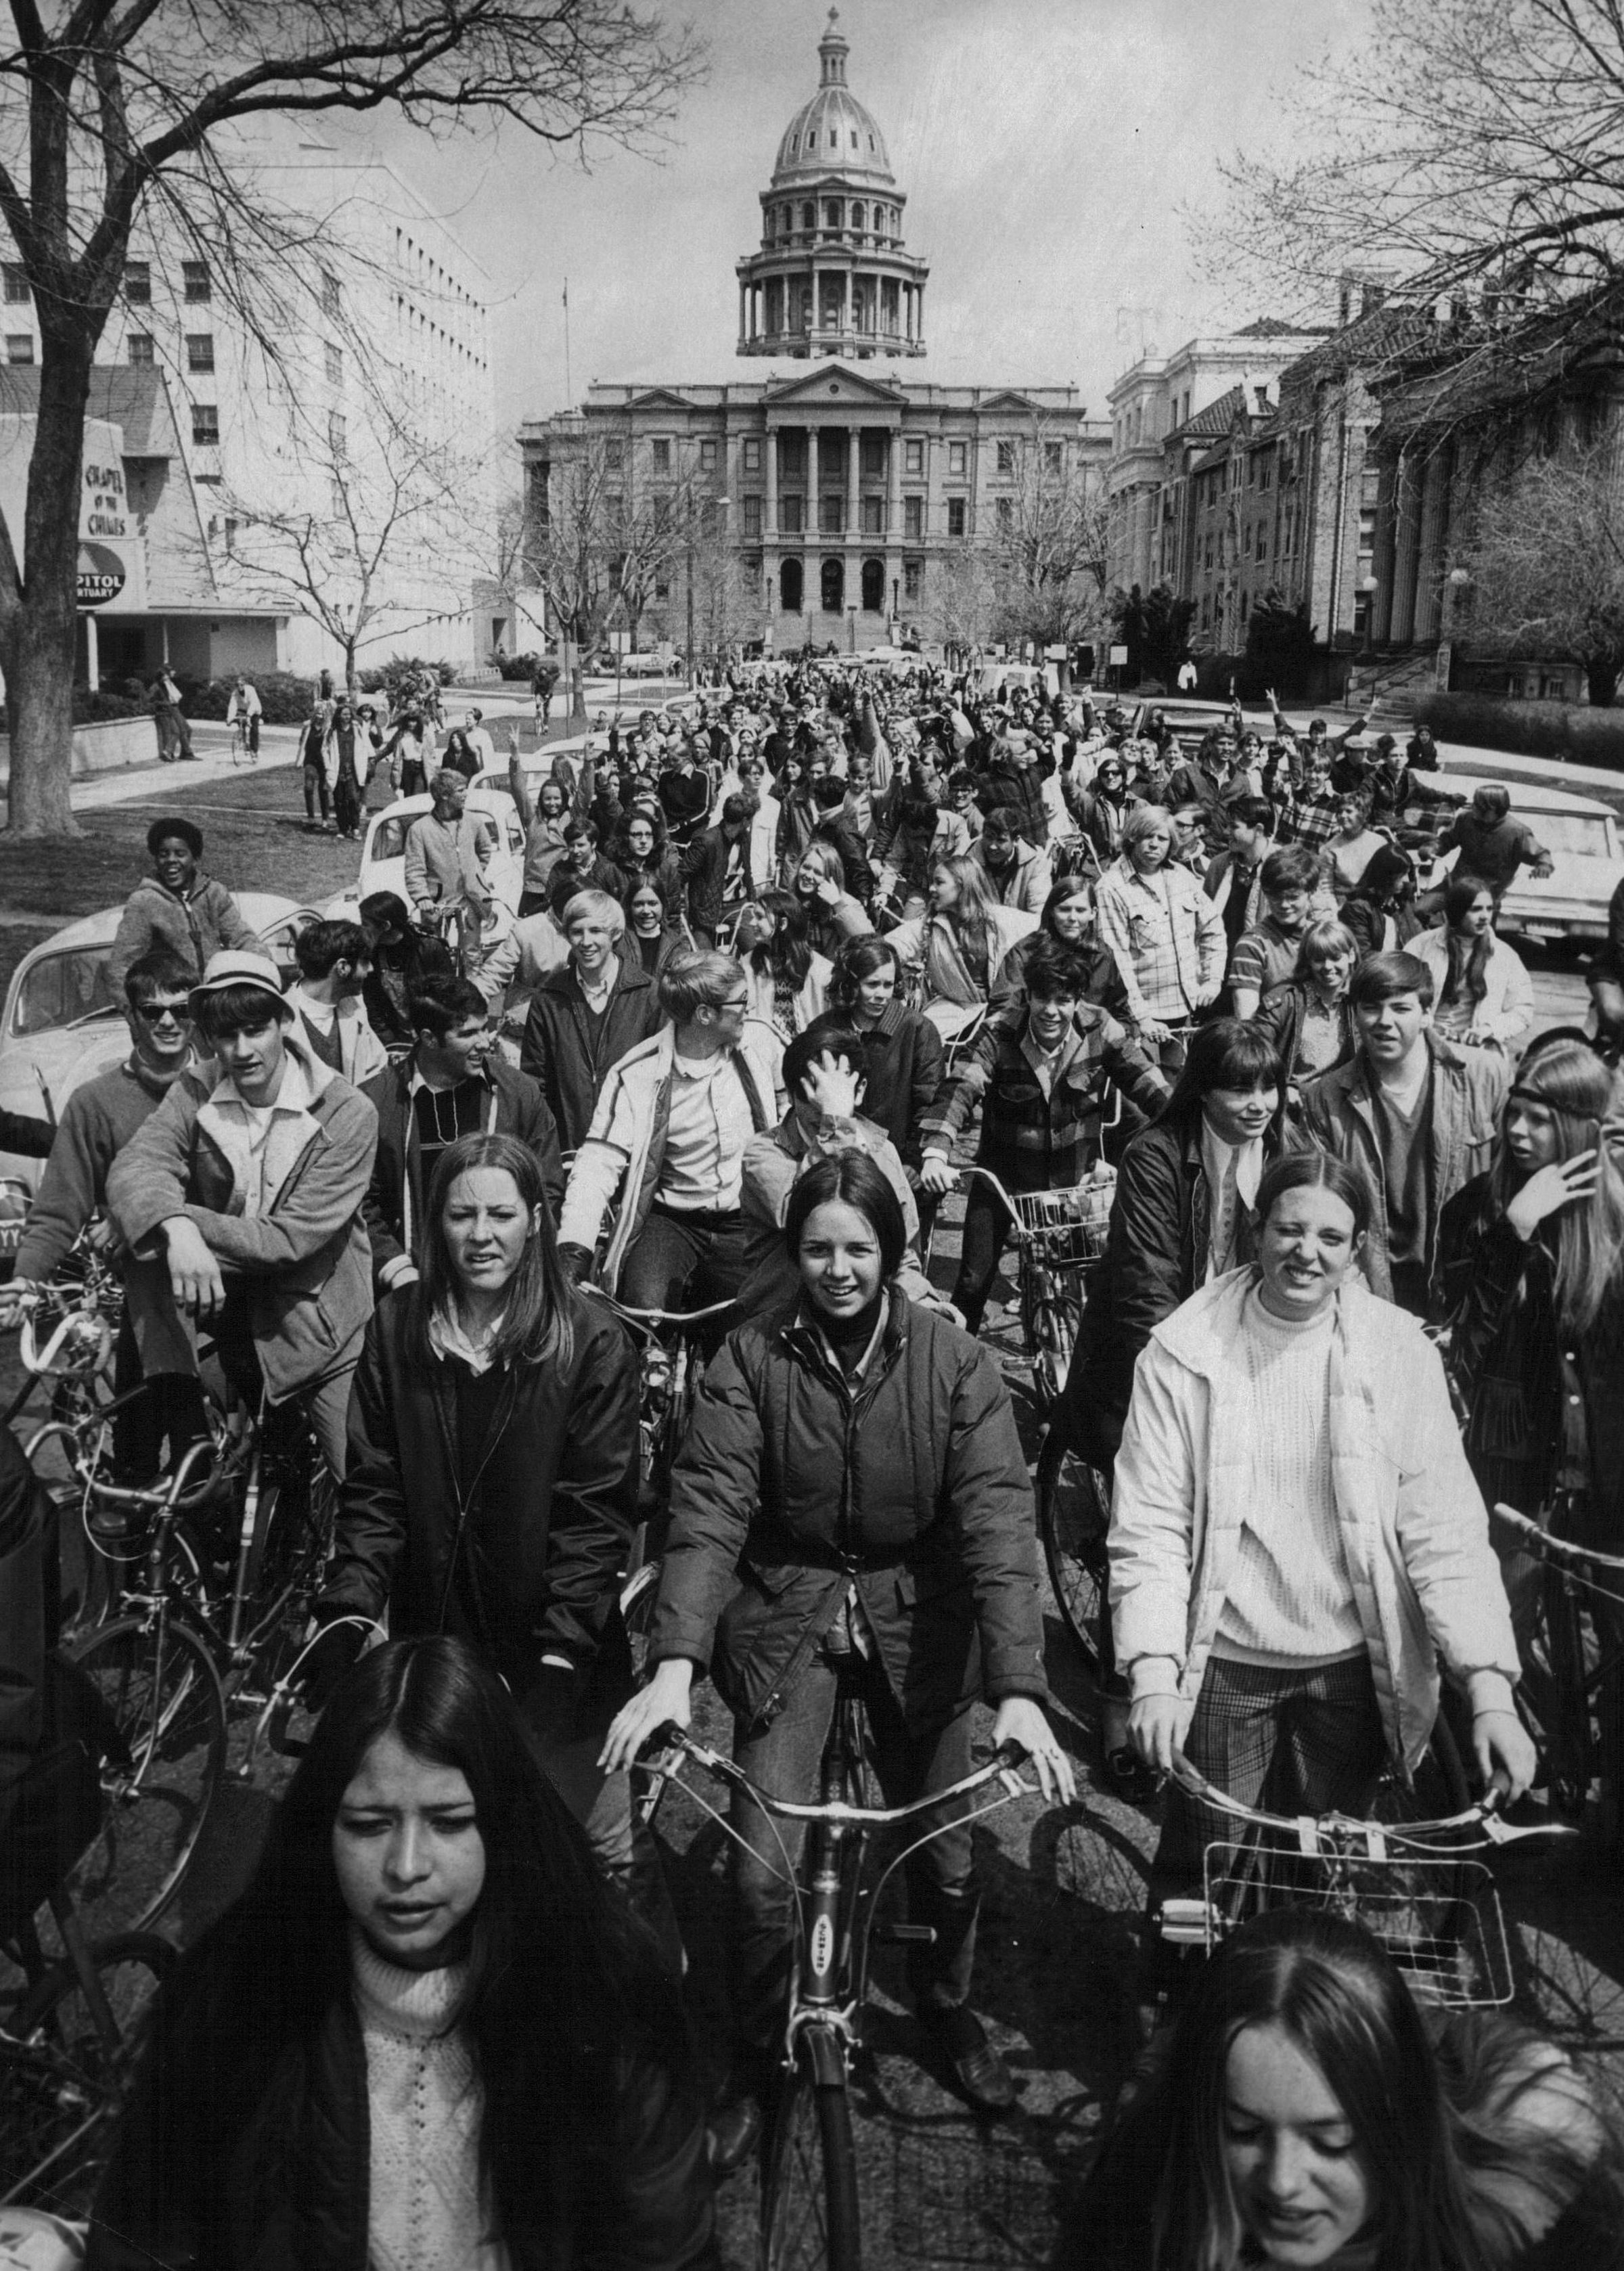 APR 22 1970, APR 22 1973, SEP 23 1974; Bicyclists Demonstrate Near State Capitol During 1970 Earth D